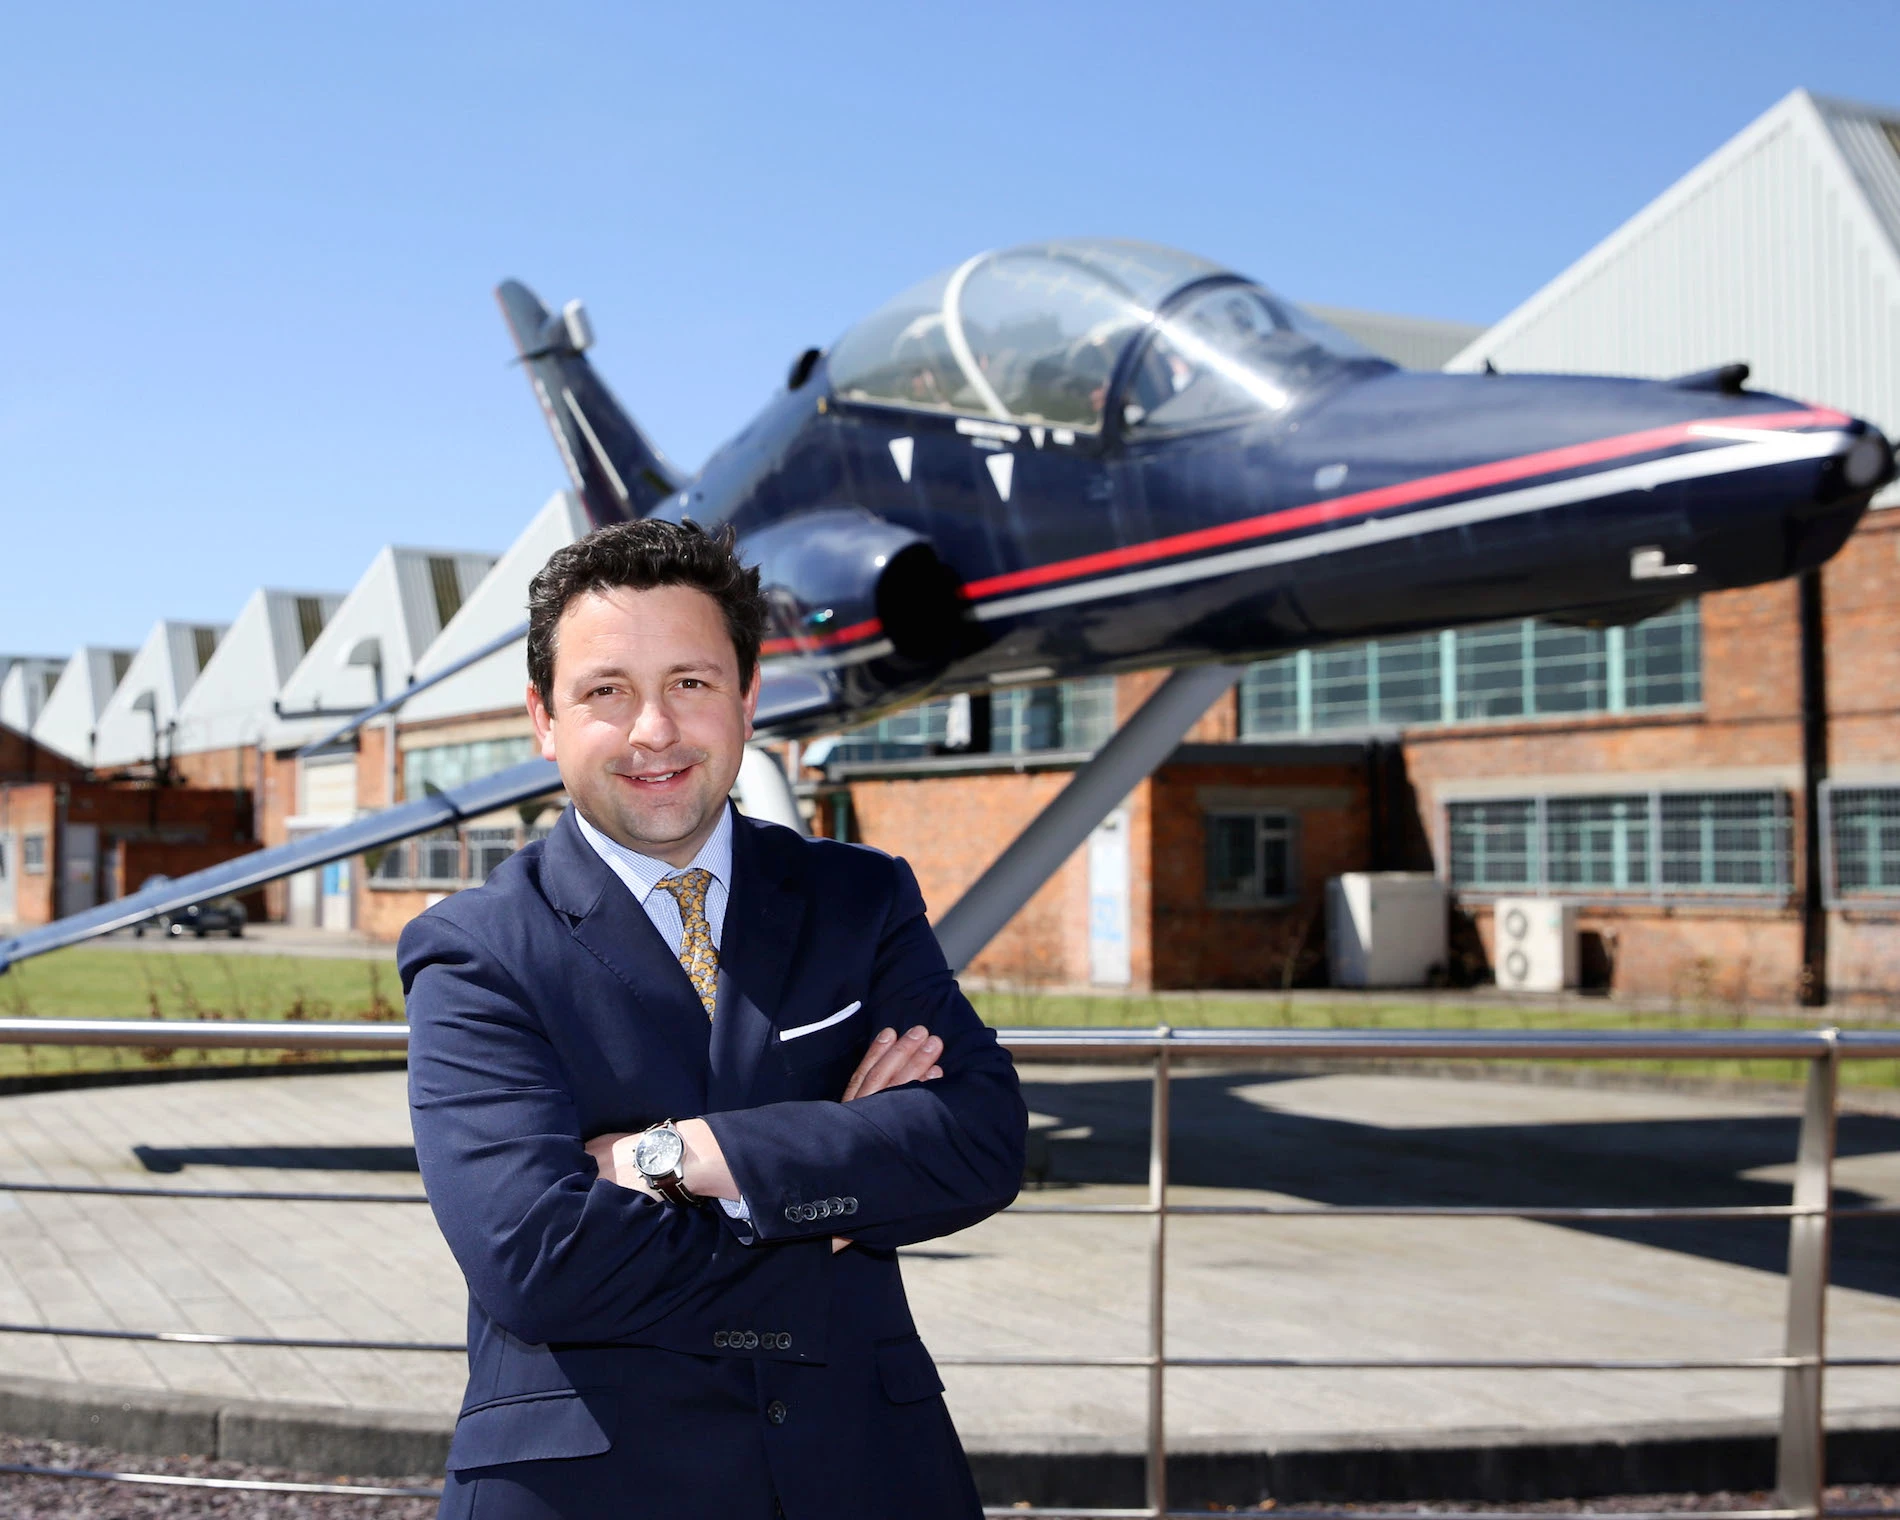 James Appleton-Metcalfe of Citivale at the Humber Enterprise Park.